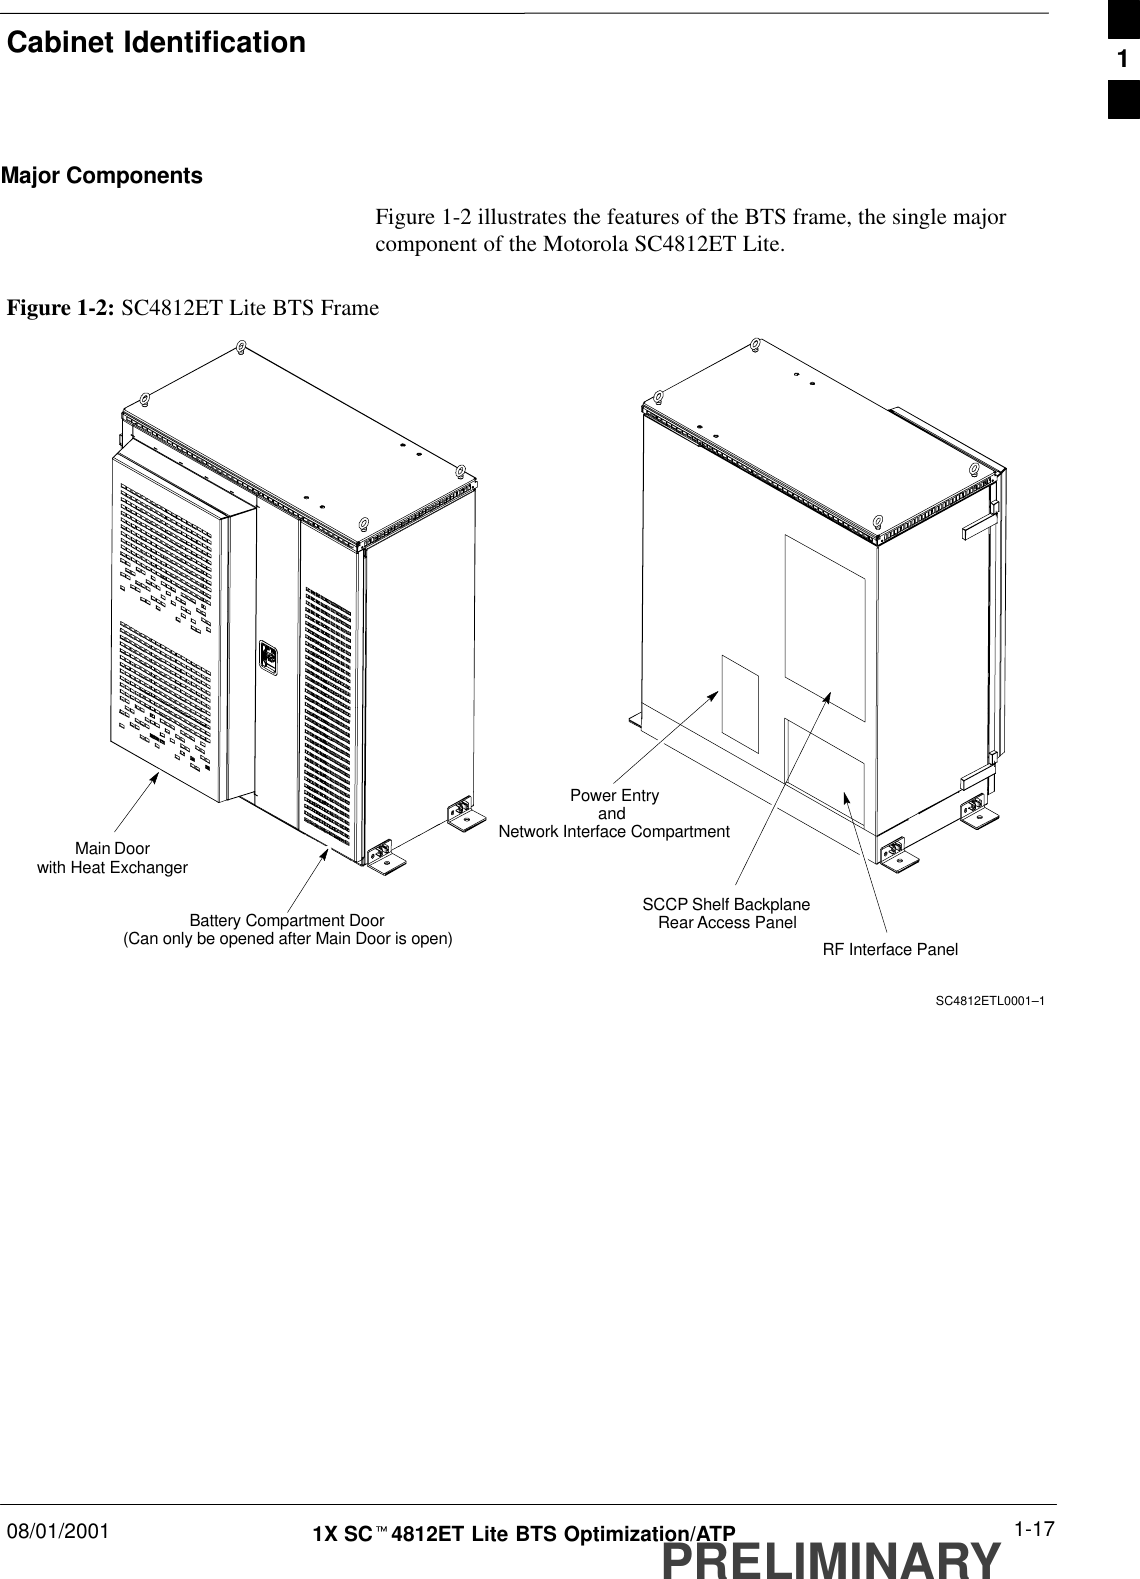 Cabinet Identification08/01/2001 1-171X SCt4812ET Lite BTS Optimization/ATPPRELIMINARYMajor ComponentsFigure 1-2 illustrates the features of the BTS frame, the single majorcomponent of the Motorola SC4812ET Lite.Figure 1-2: SC4812ET Lite BTS FrameBattery Compartment Door(Can only be opened after Main Door is open) RF Interface PanelSCCP Shelf BackplaneRear Access PanelPower EntryandNetwork Interface CompartmentSC4812ETL0001–1Main Doorwith Heat Exchanger1